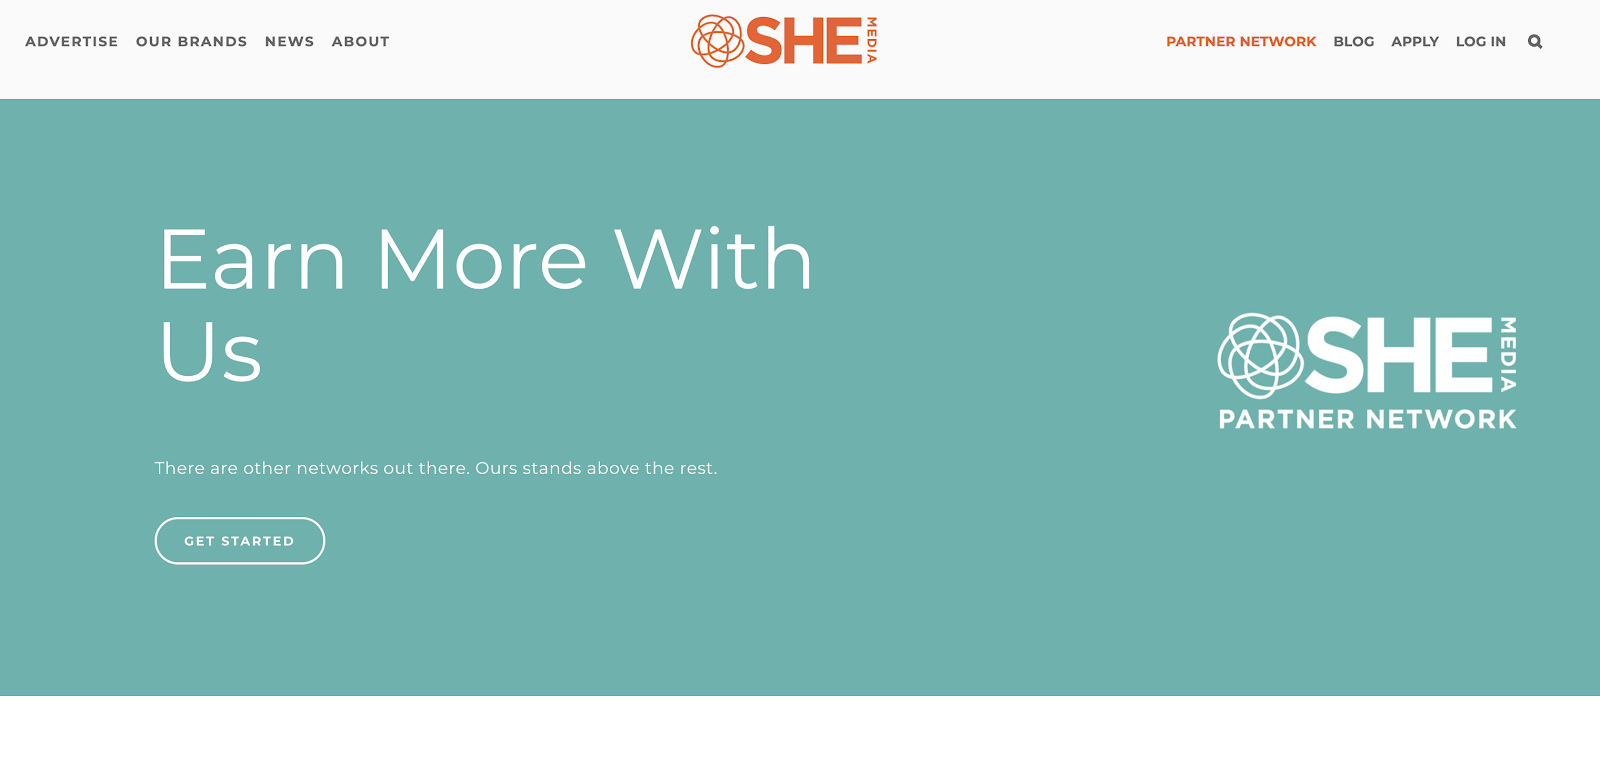 Sign up Process for the SHE Media Partner Network